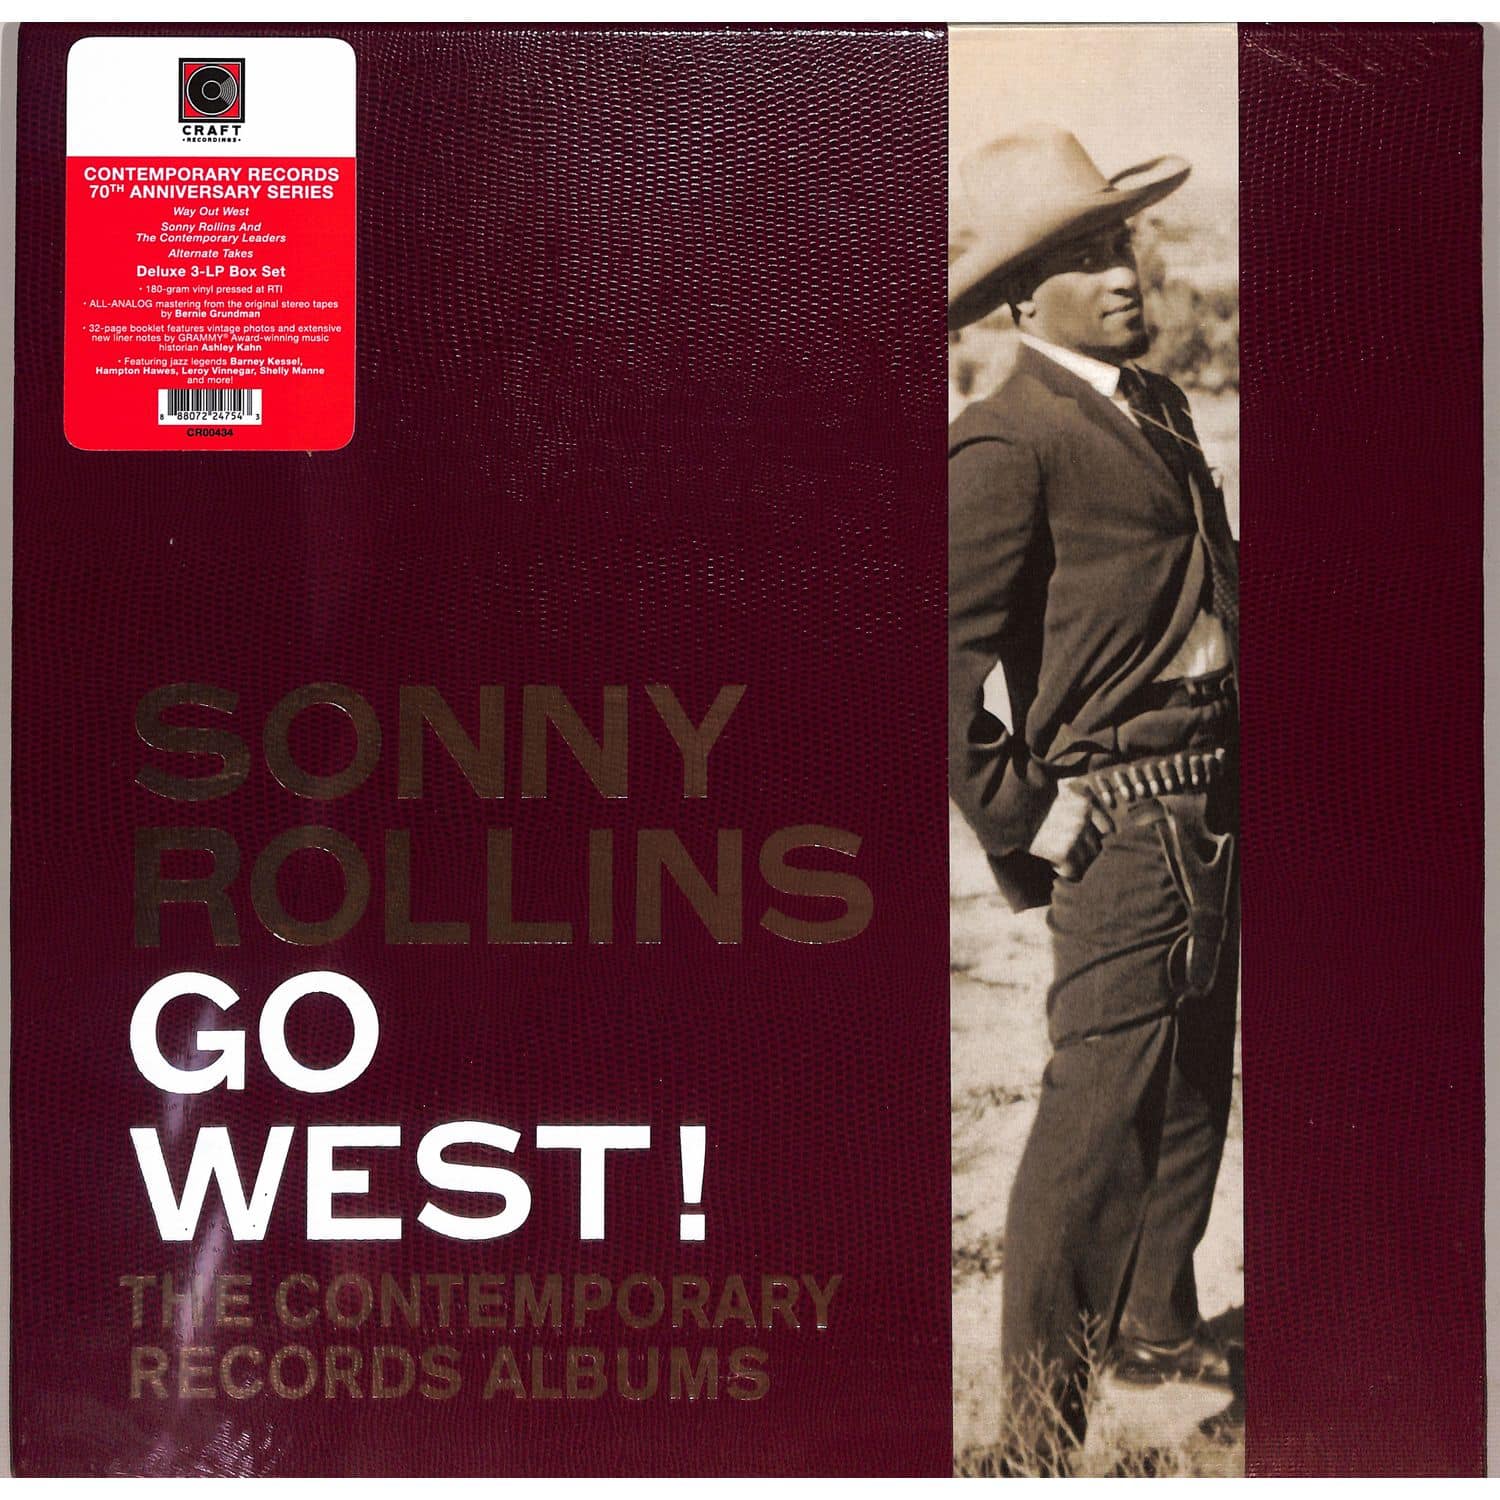 Sonny Rollins - GO WEST!: THE CONTEMPORARY RECORDS ALBUMS 